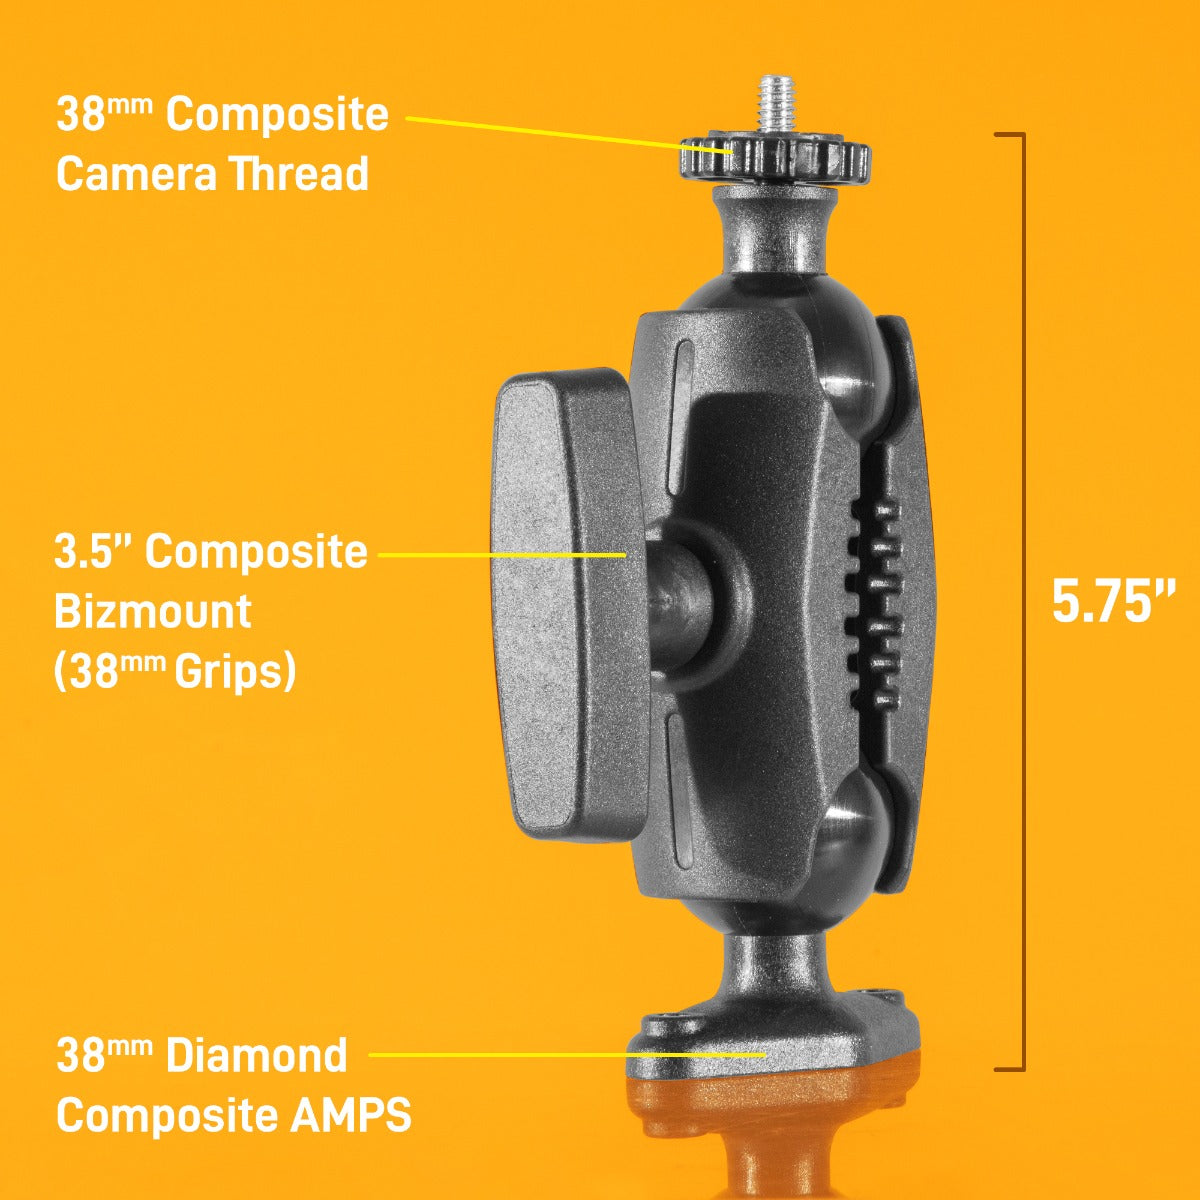 iBOLT™ 38mm / 1.5 inch Composite Diamond AMPS to ¼ 20” Composite Camera Screw Mount